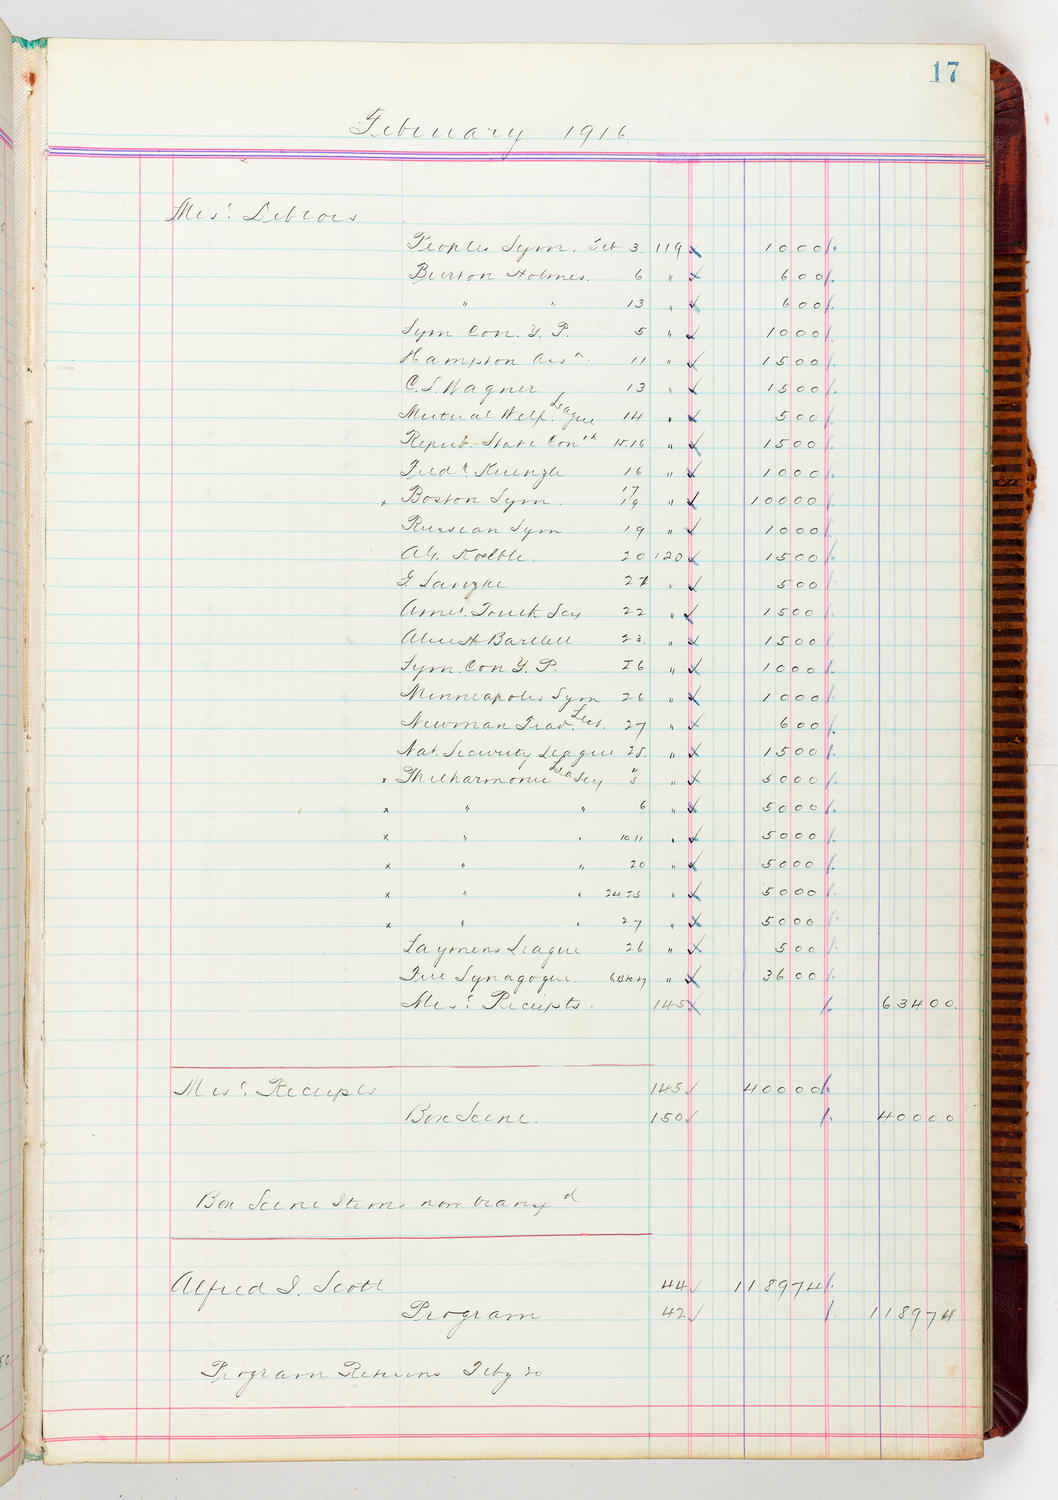 Music Hall Accounting Ledger, volume 5, page 17